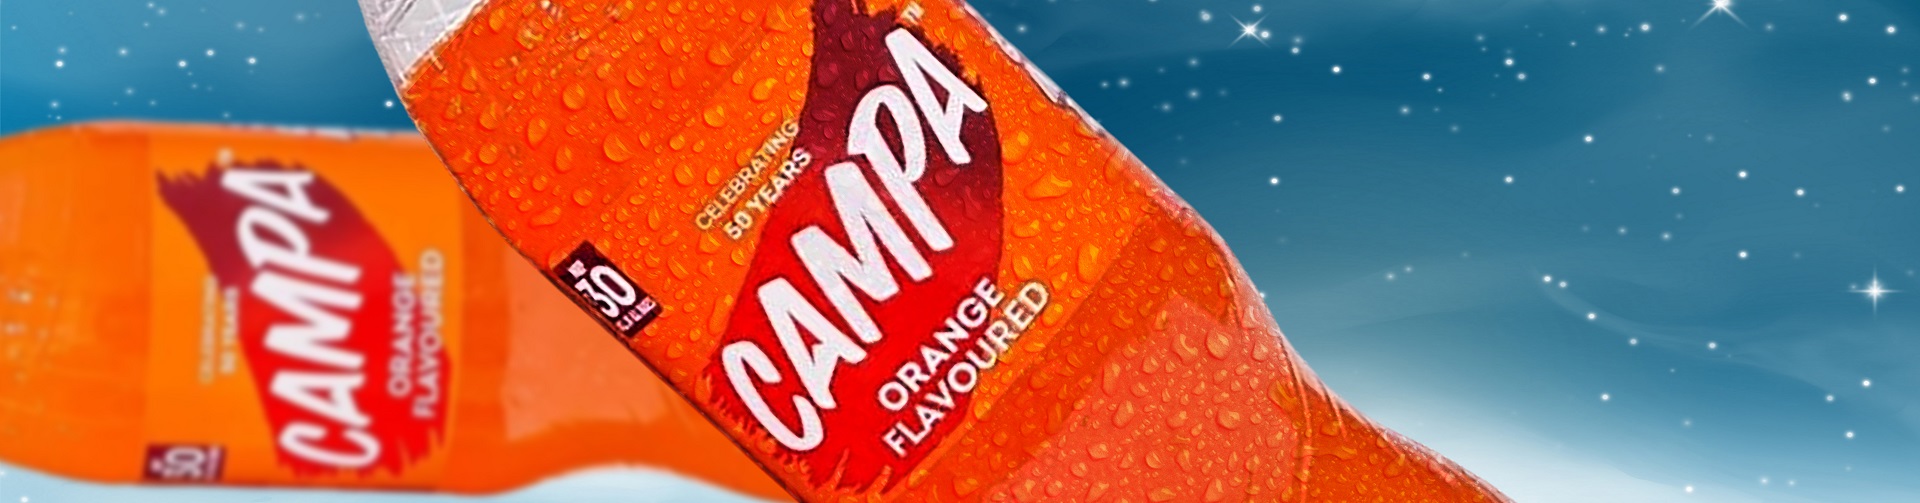 Image of a Campa Orange banner with a refreshing drink